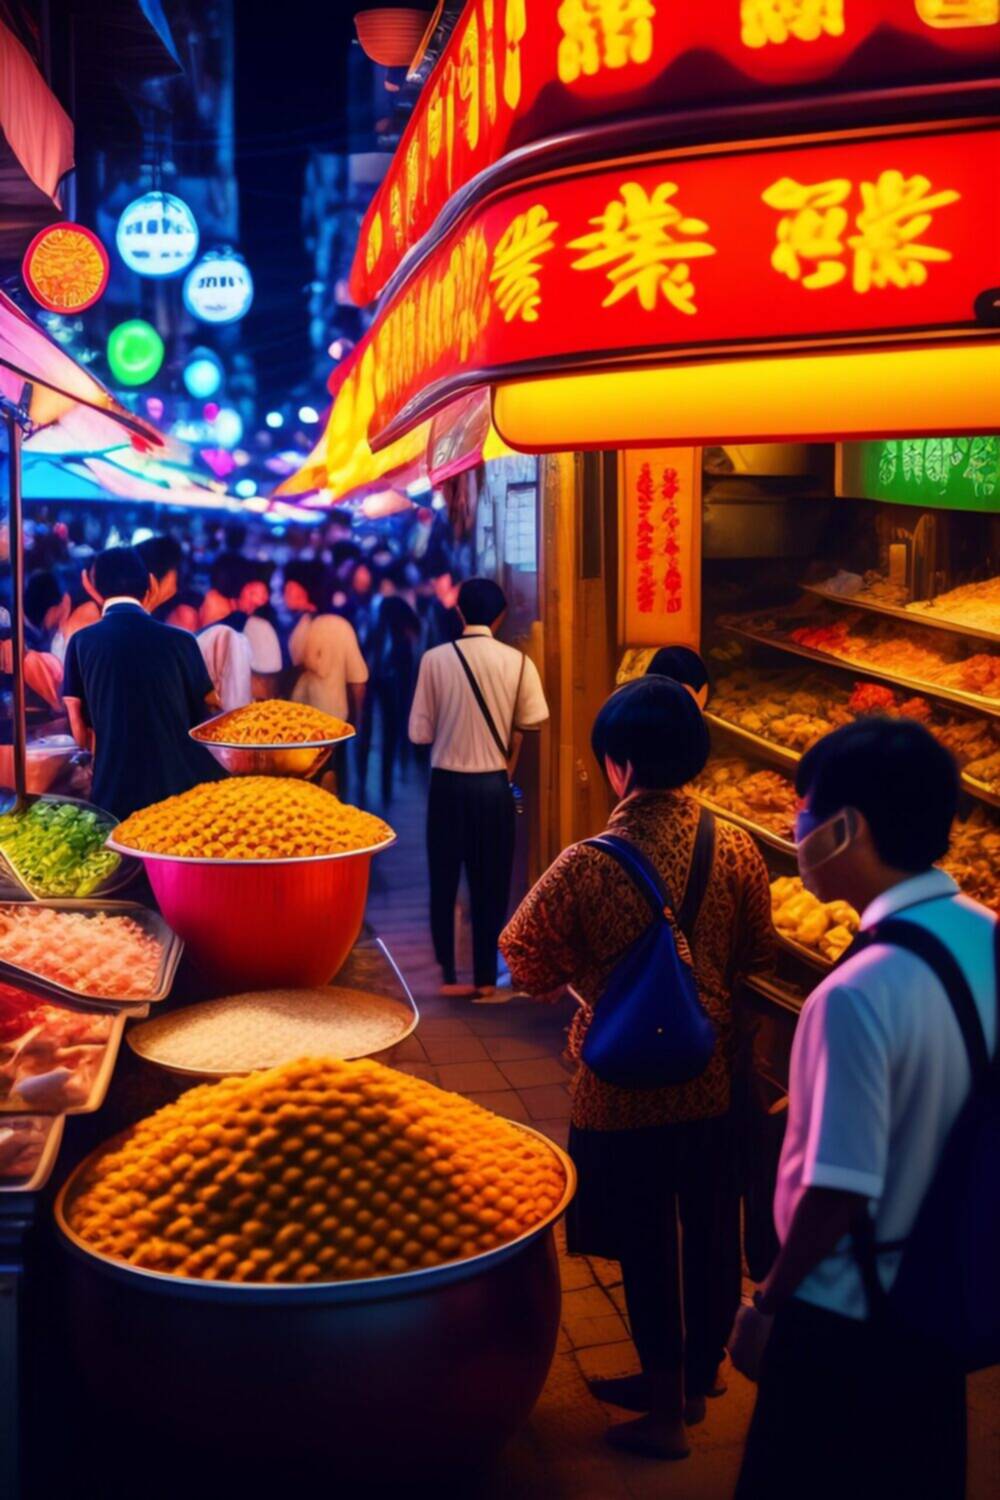 The world's largest street food festival is the night markets in Taipei, Taiwan